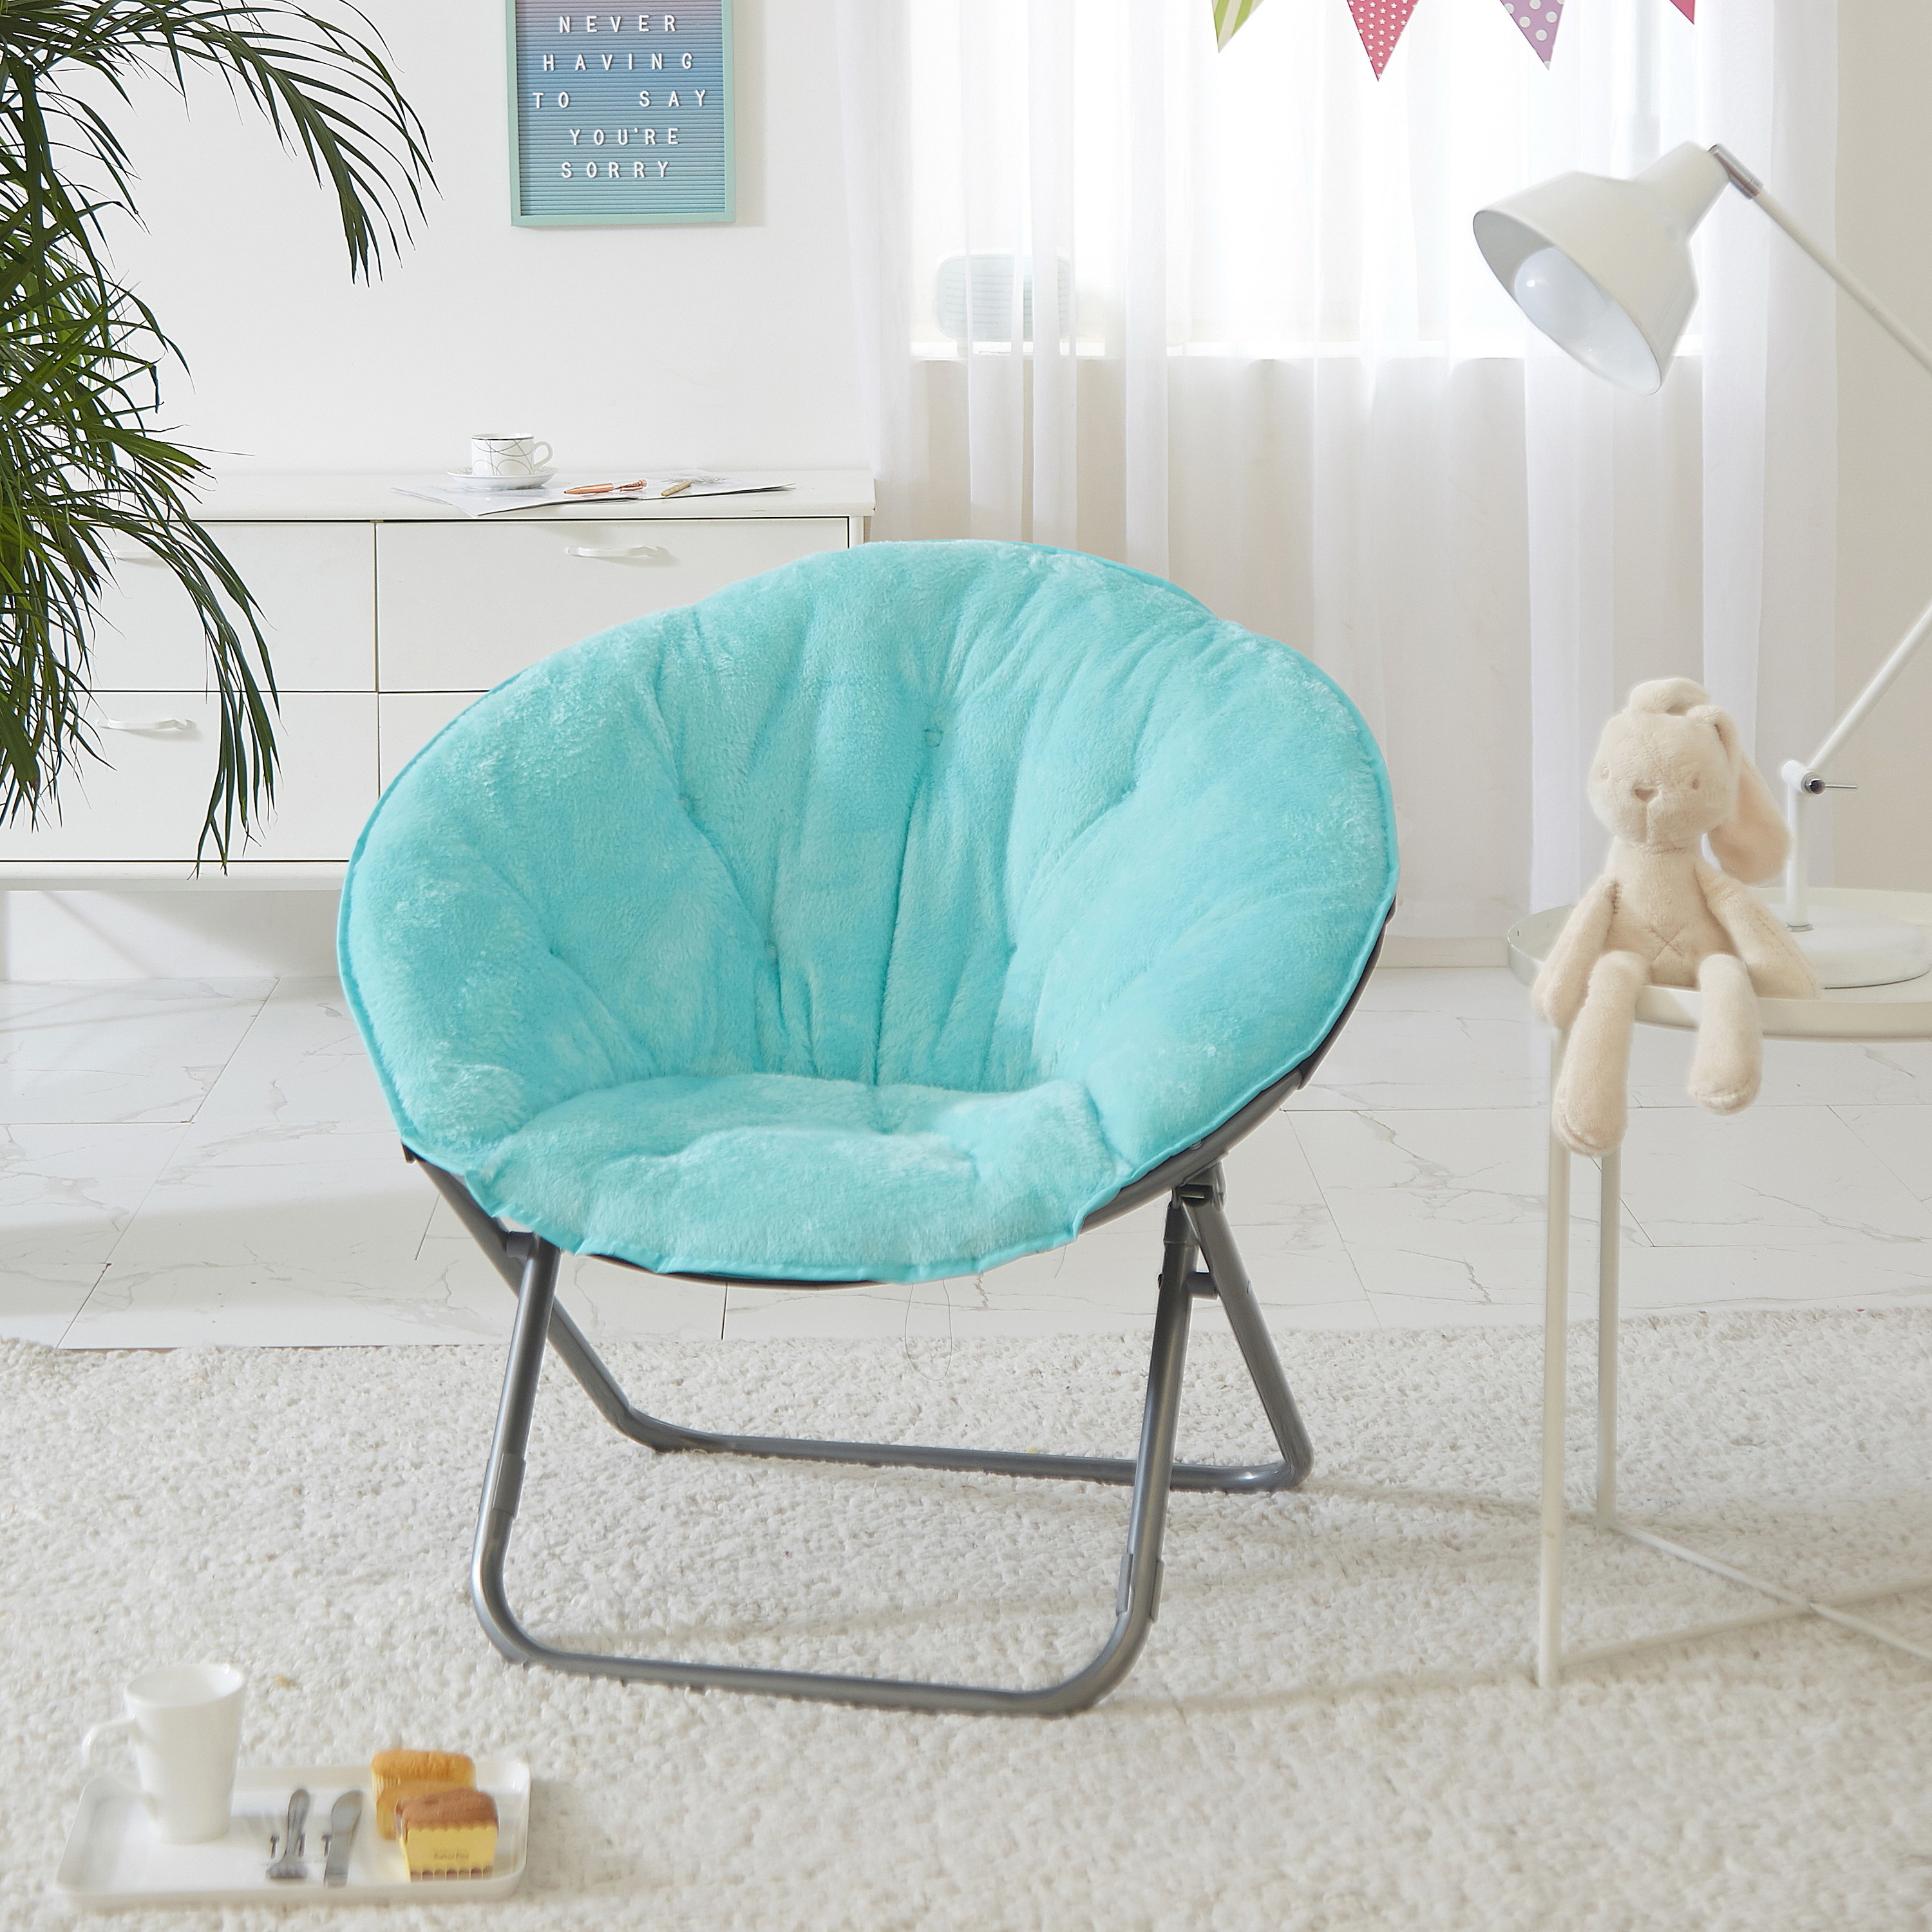 An image of a faux fur saucer chair with a soft wide seat and a foldable steel frame